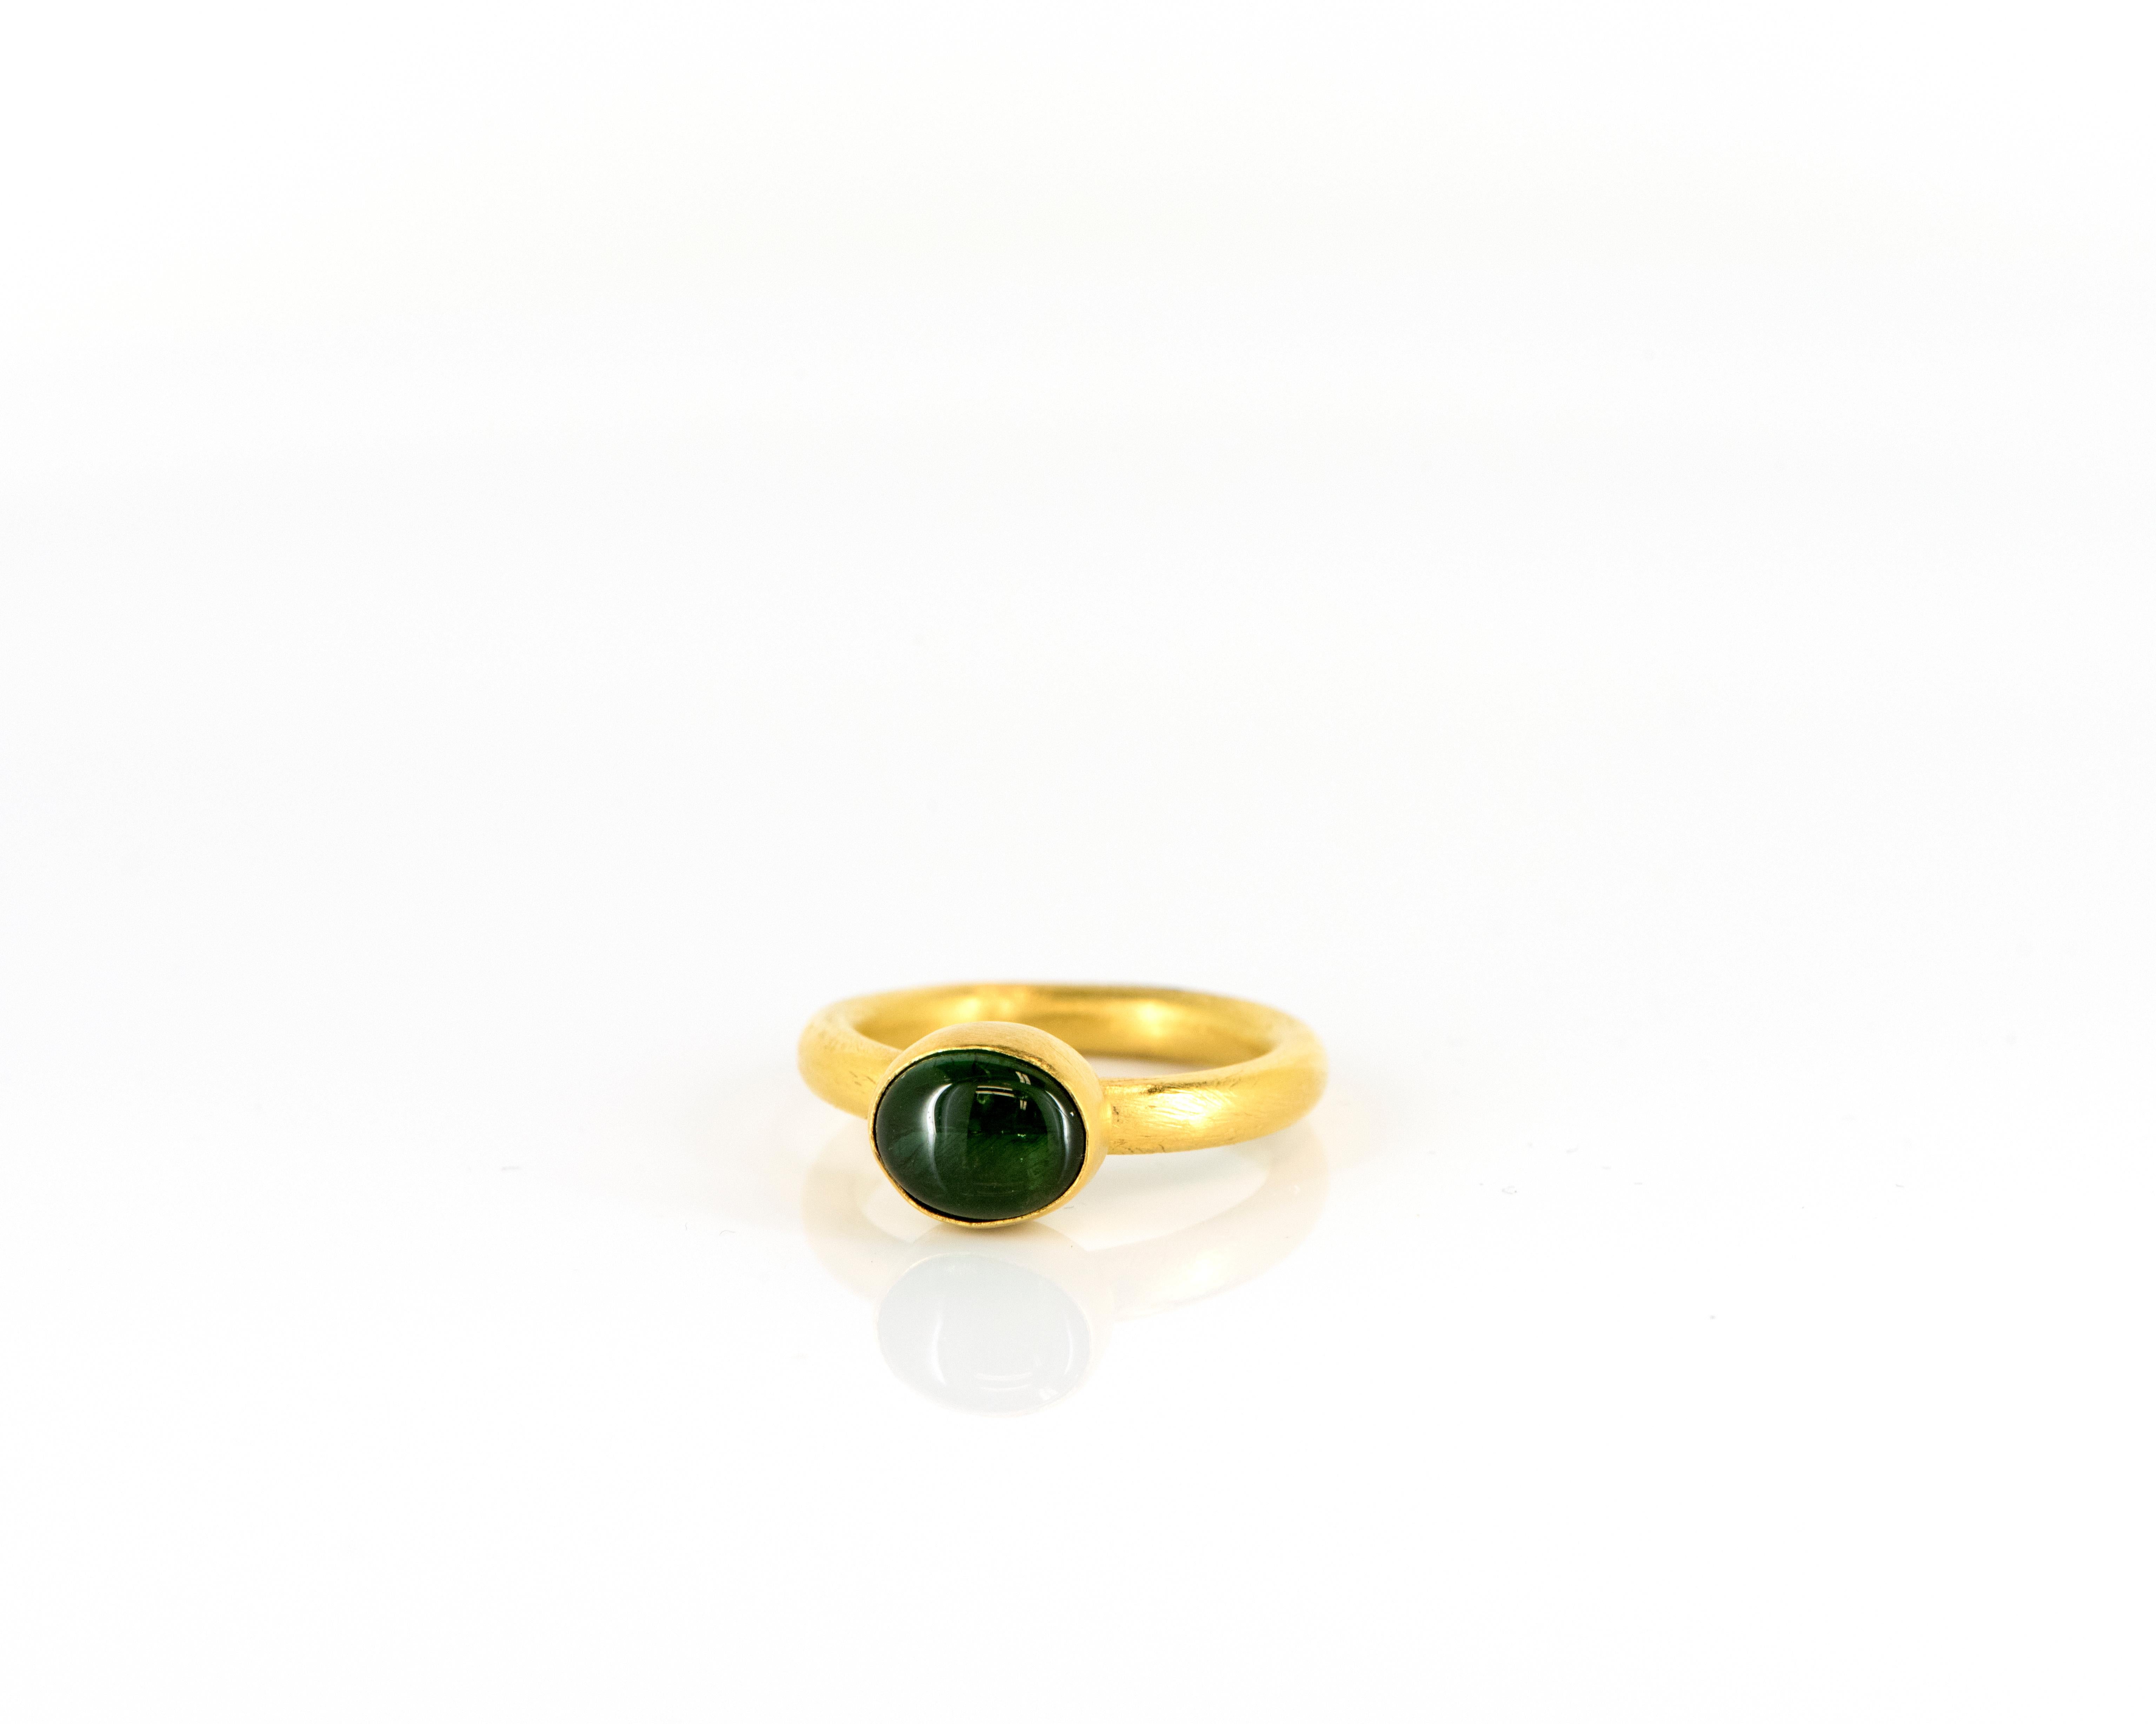 Featuring the natural beauty of Tourmaline, these 24 Karat Yellow Gold Stackable Rings are the perfect addition to any jewelry collection. The rich green and pink hues of the Tourmaline gemstones complement each other perfectly, adding a pop of